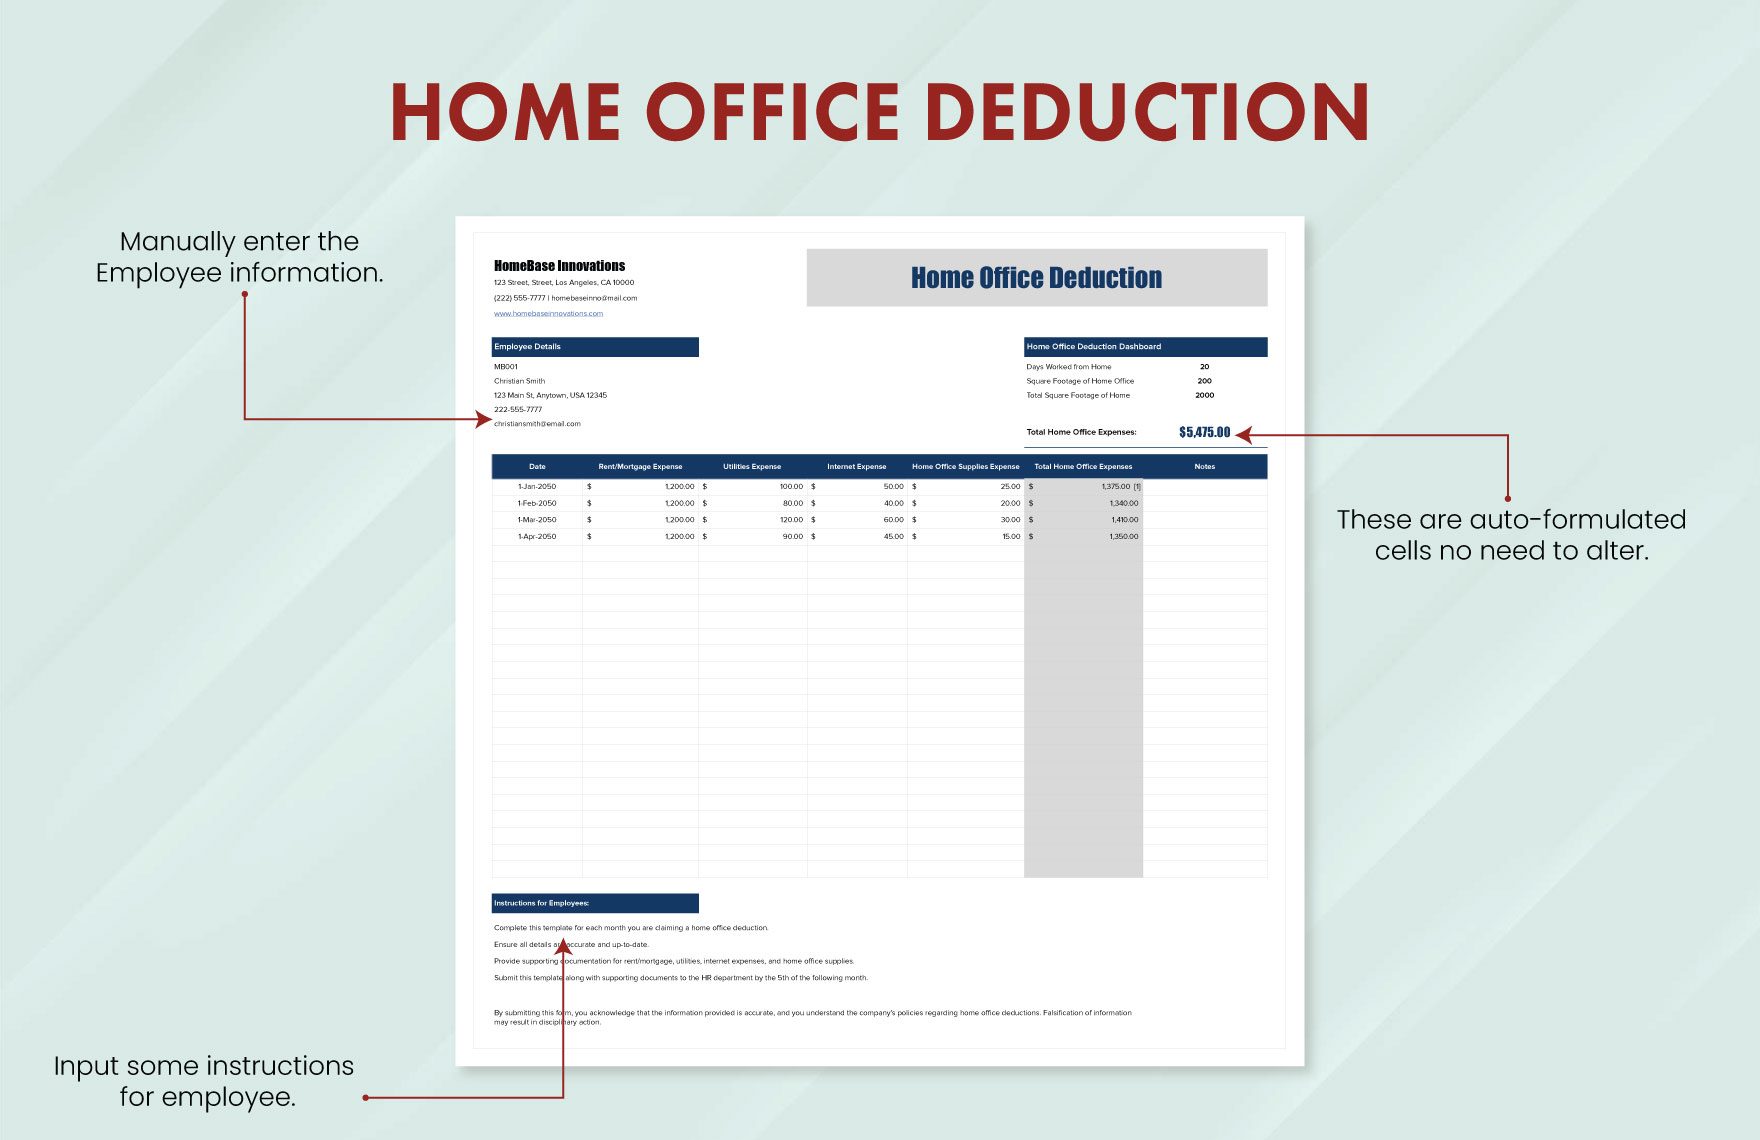 Home Office Deduction Template